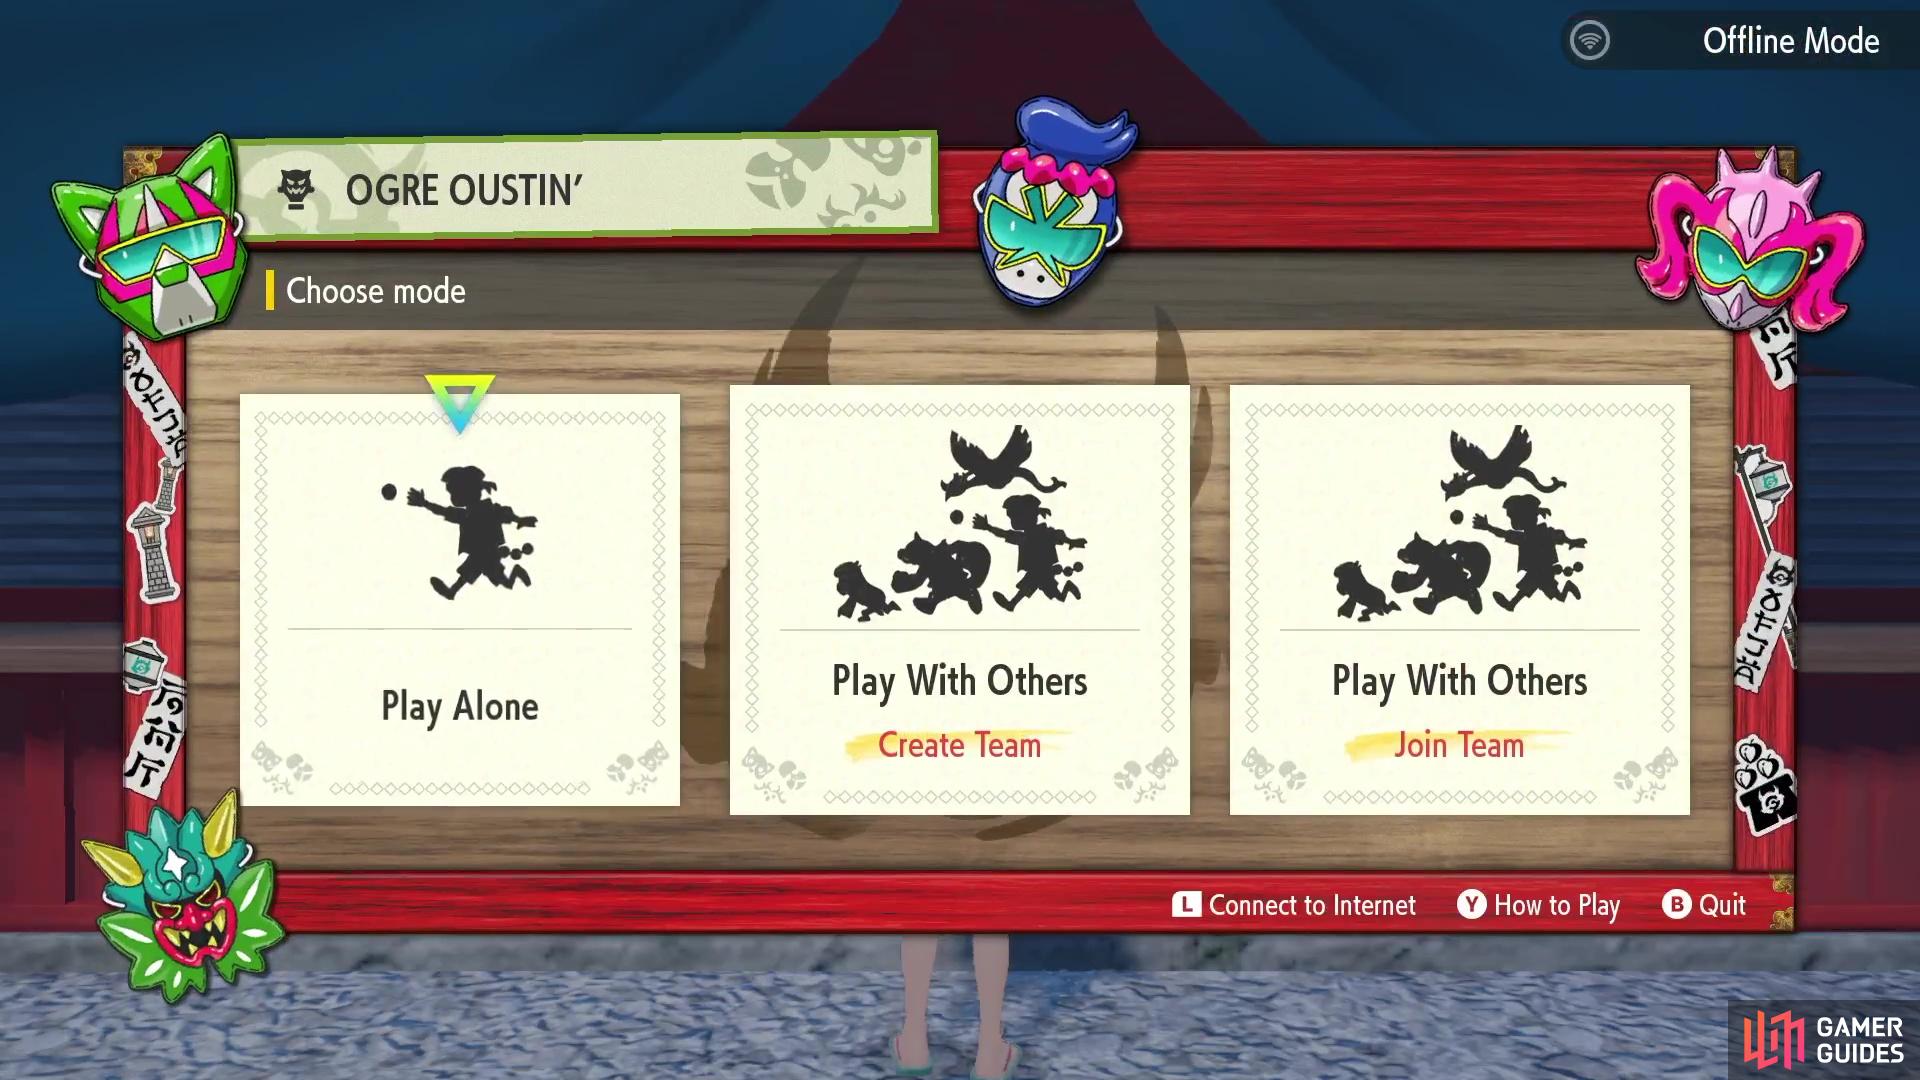 Trainers must play with others to complete the ten stages of Ogre Oustin’! hard rank.